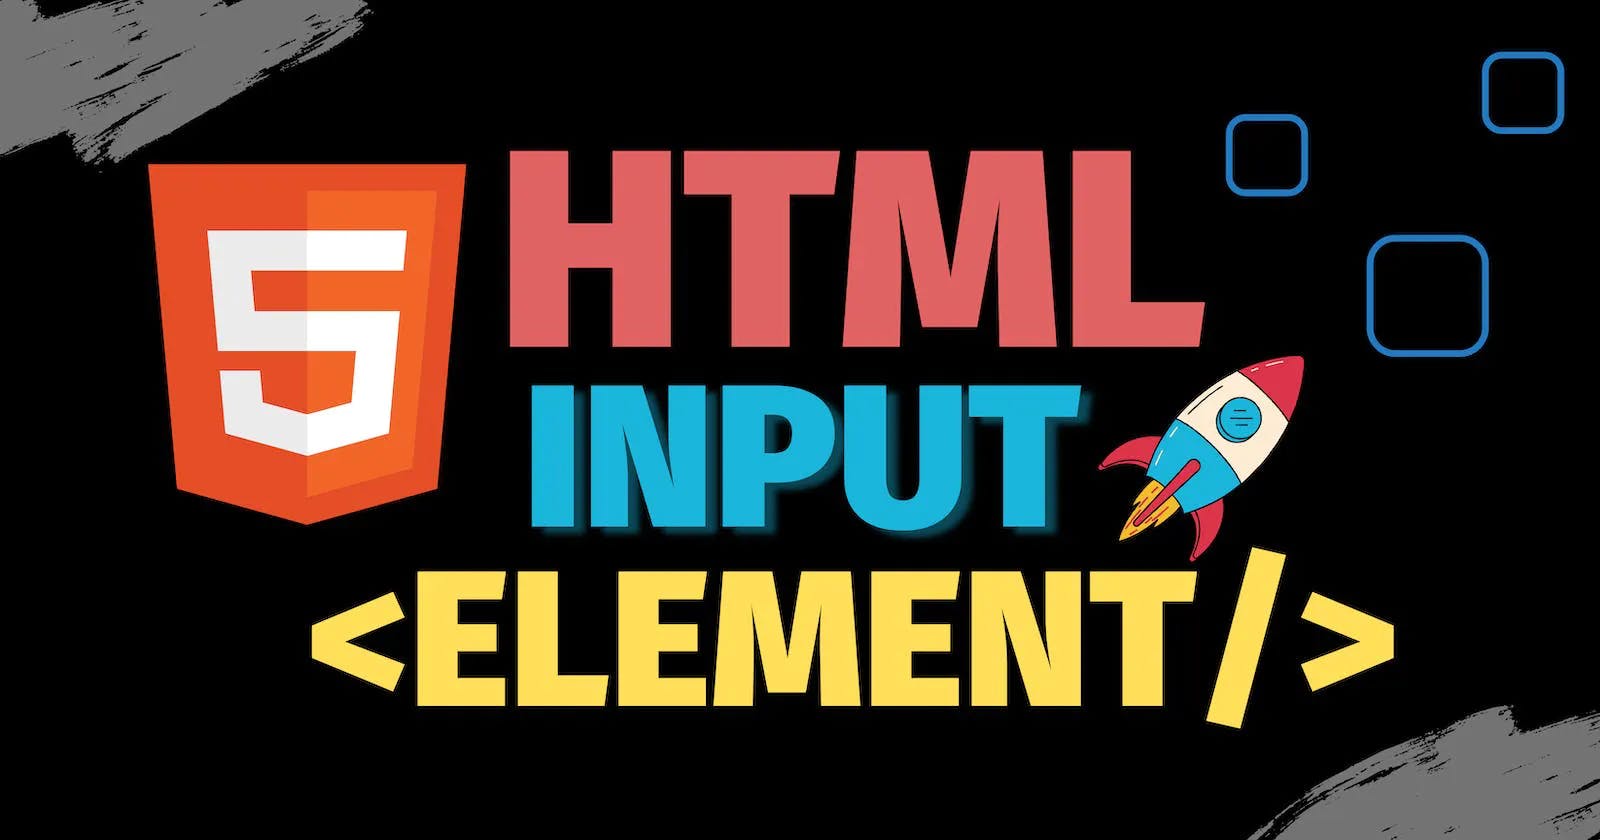 List of Input Elements in HTML